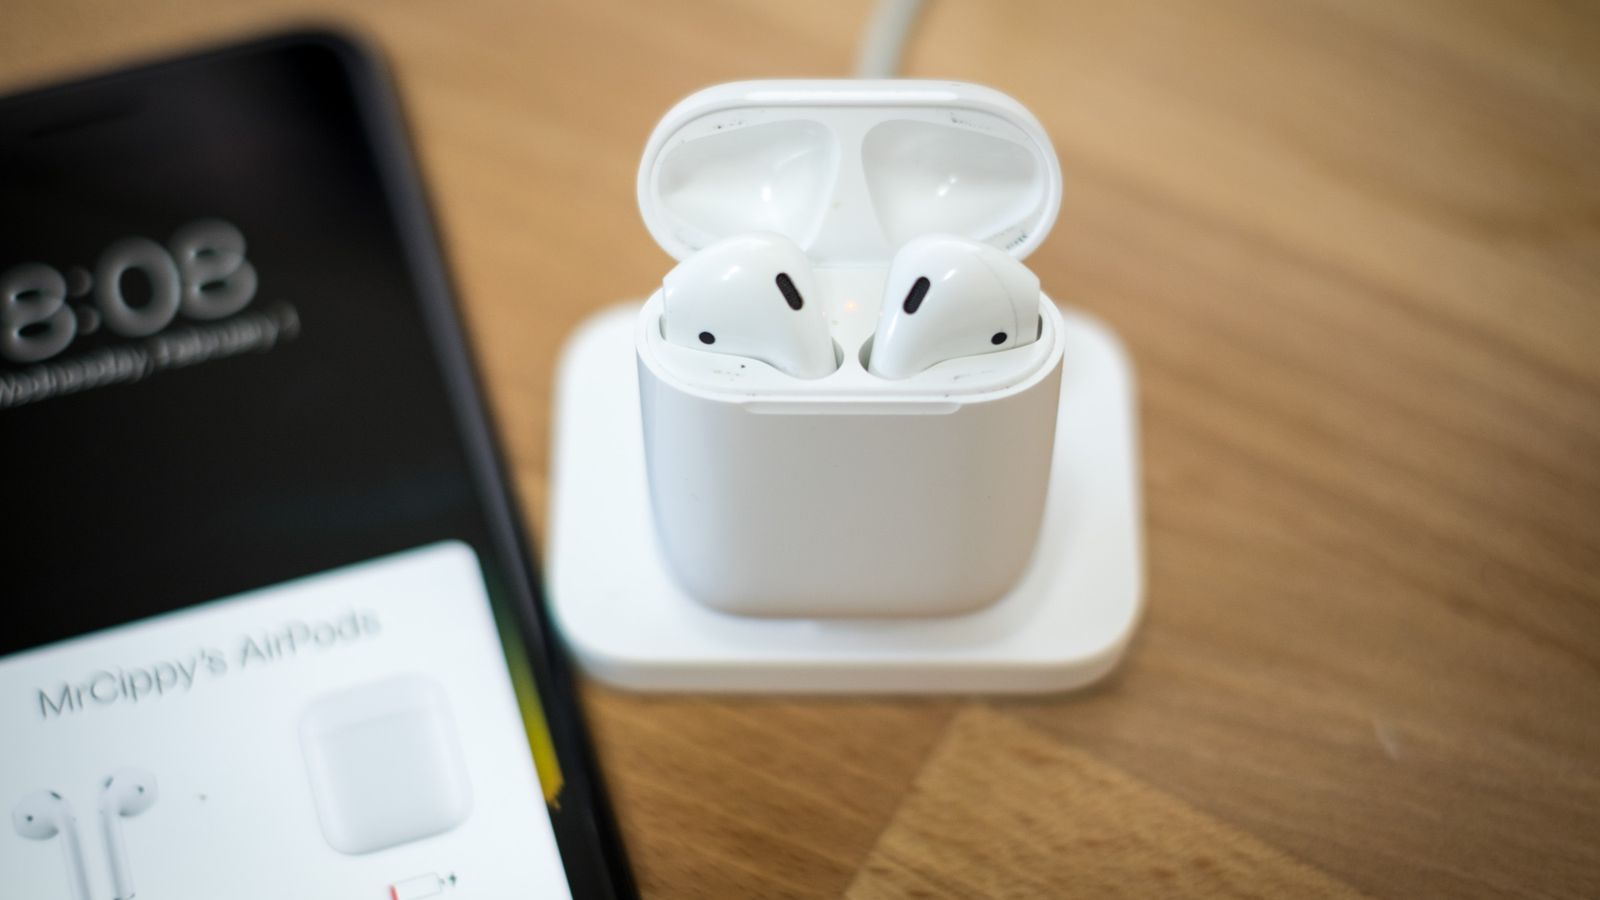 iOS 12.2 Developer Beta Hints AirPods With Voice Control